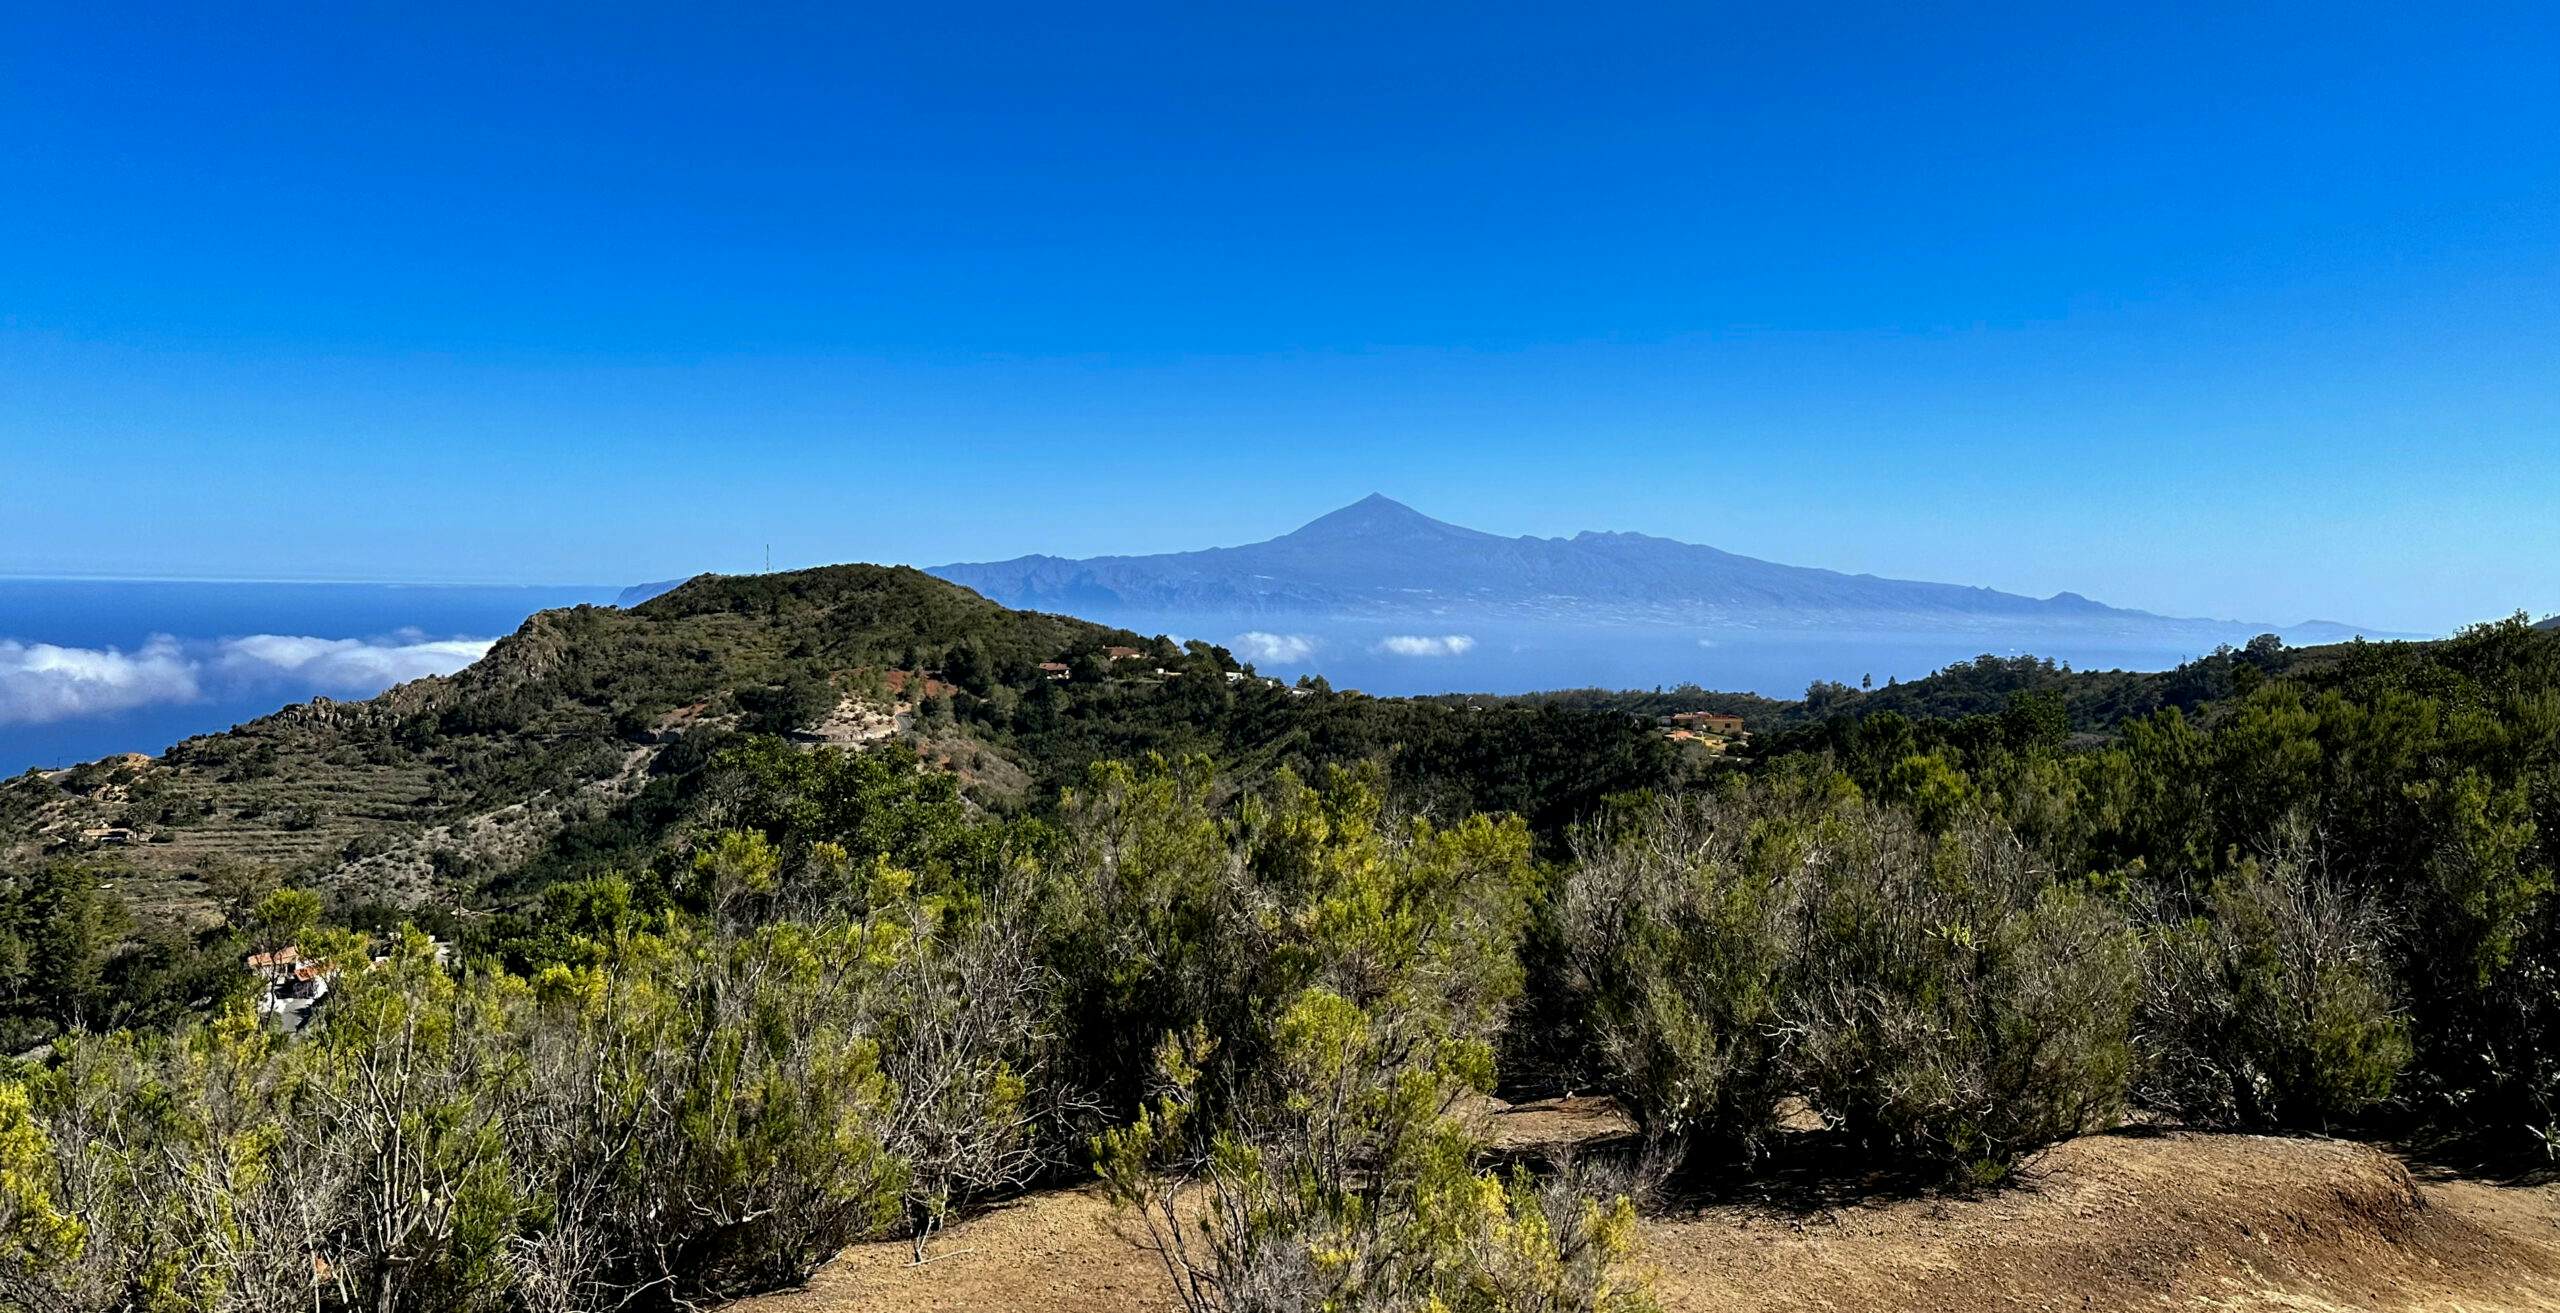 View from the High-Level Hike on Tenerife - GR 132 hiking trail, 2nd stage - Hermigua - Vallehermoso